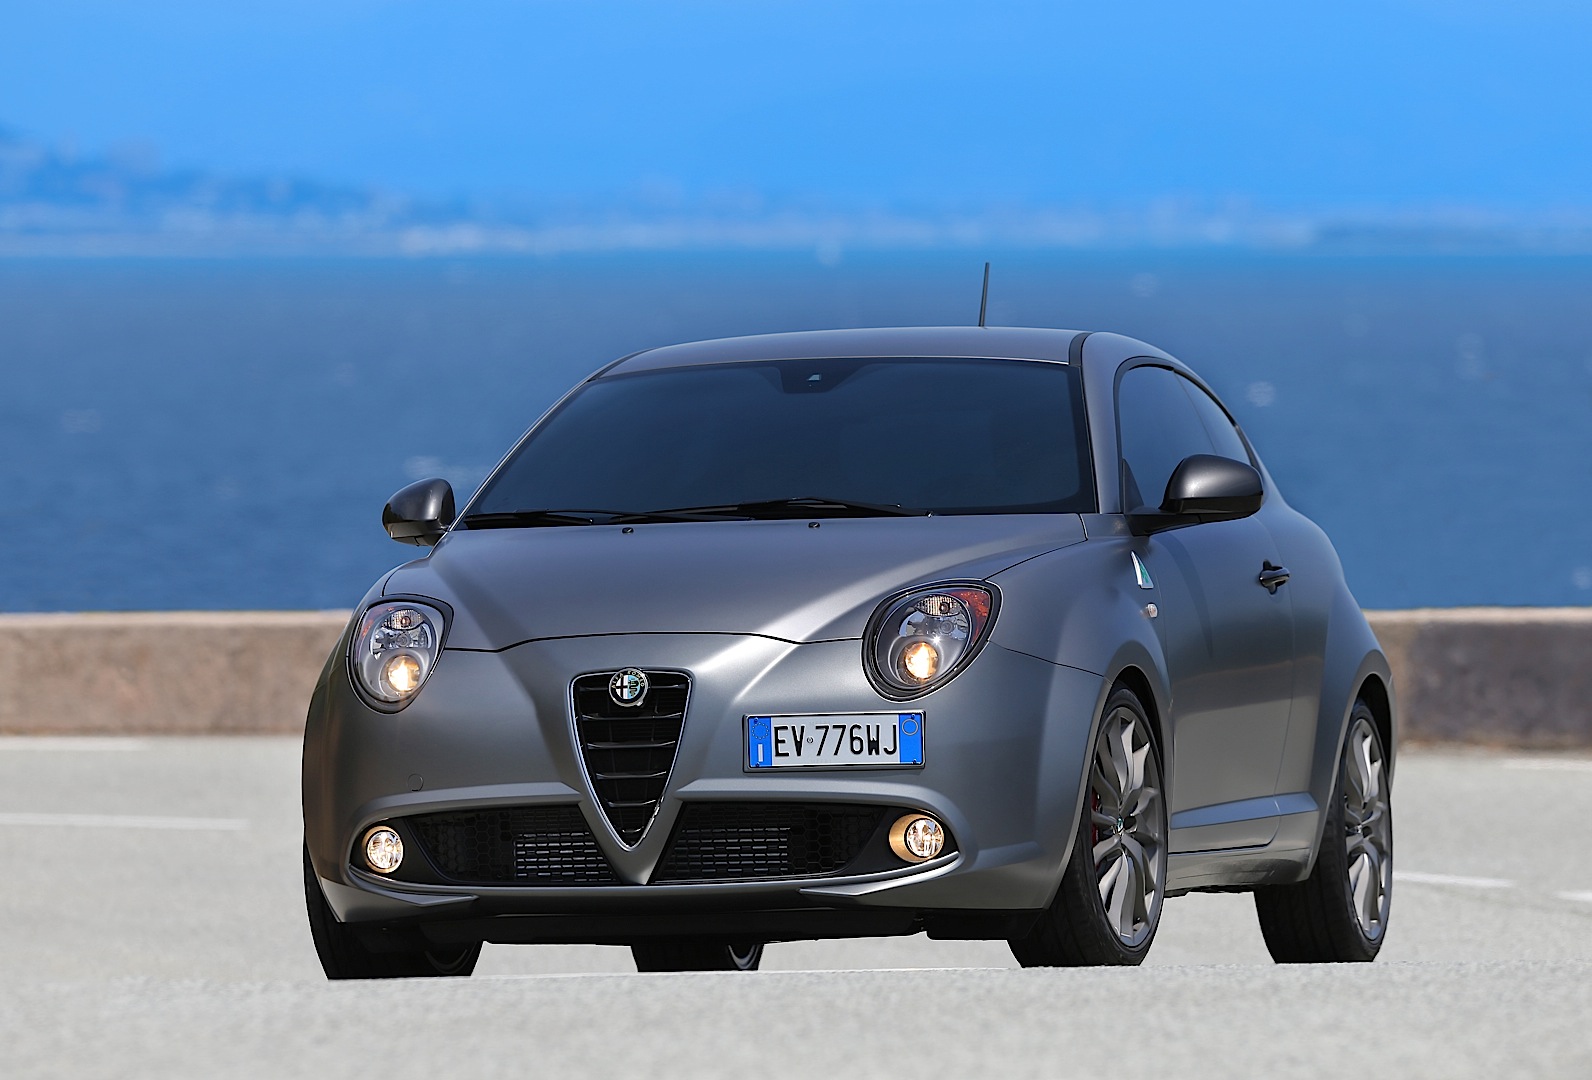 Cool Car For Young Drivers? The 170PS Alfa Romeo MiTO QV Review 